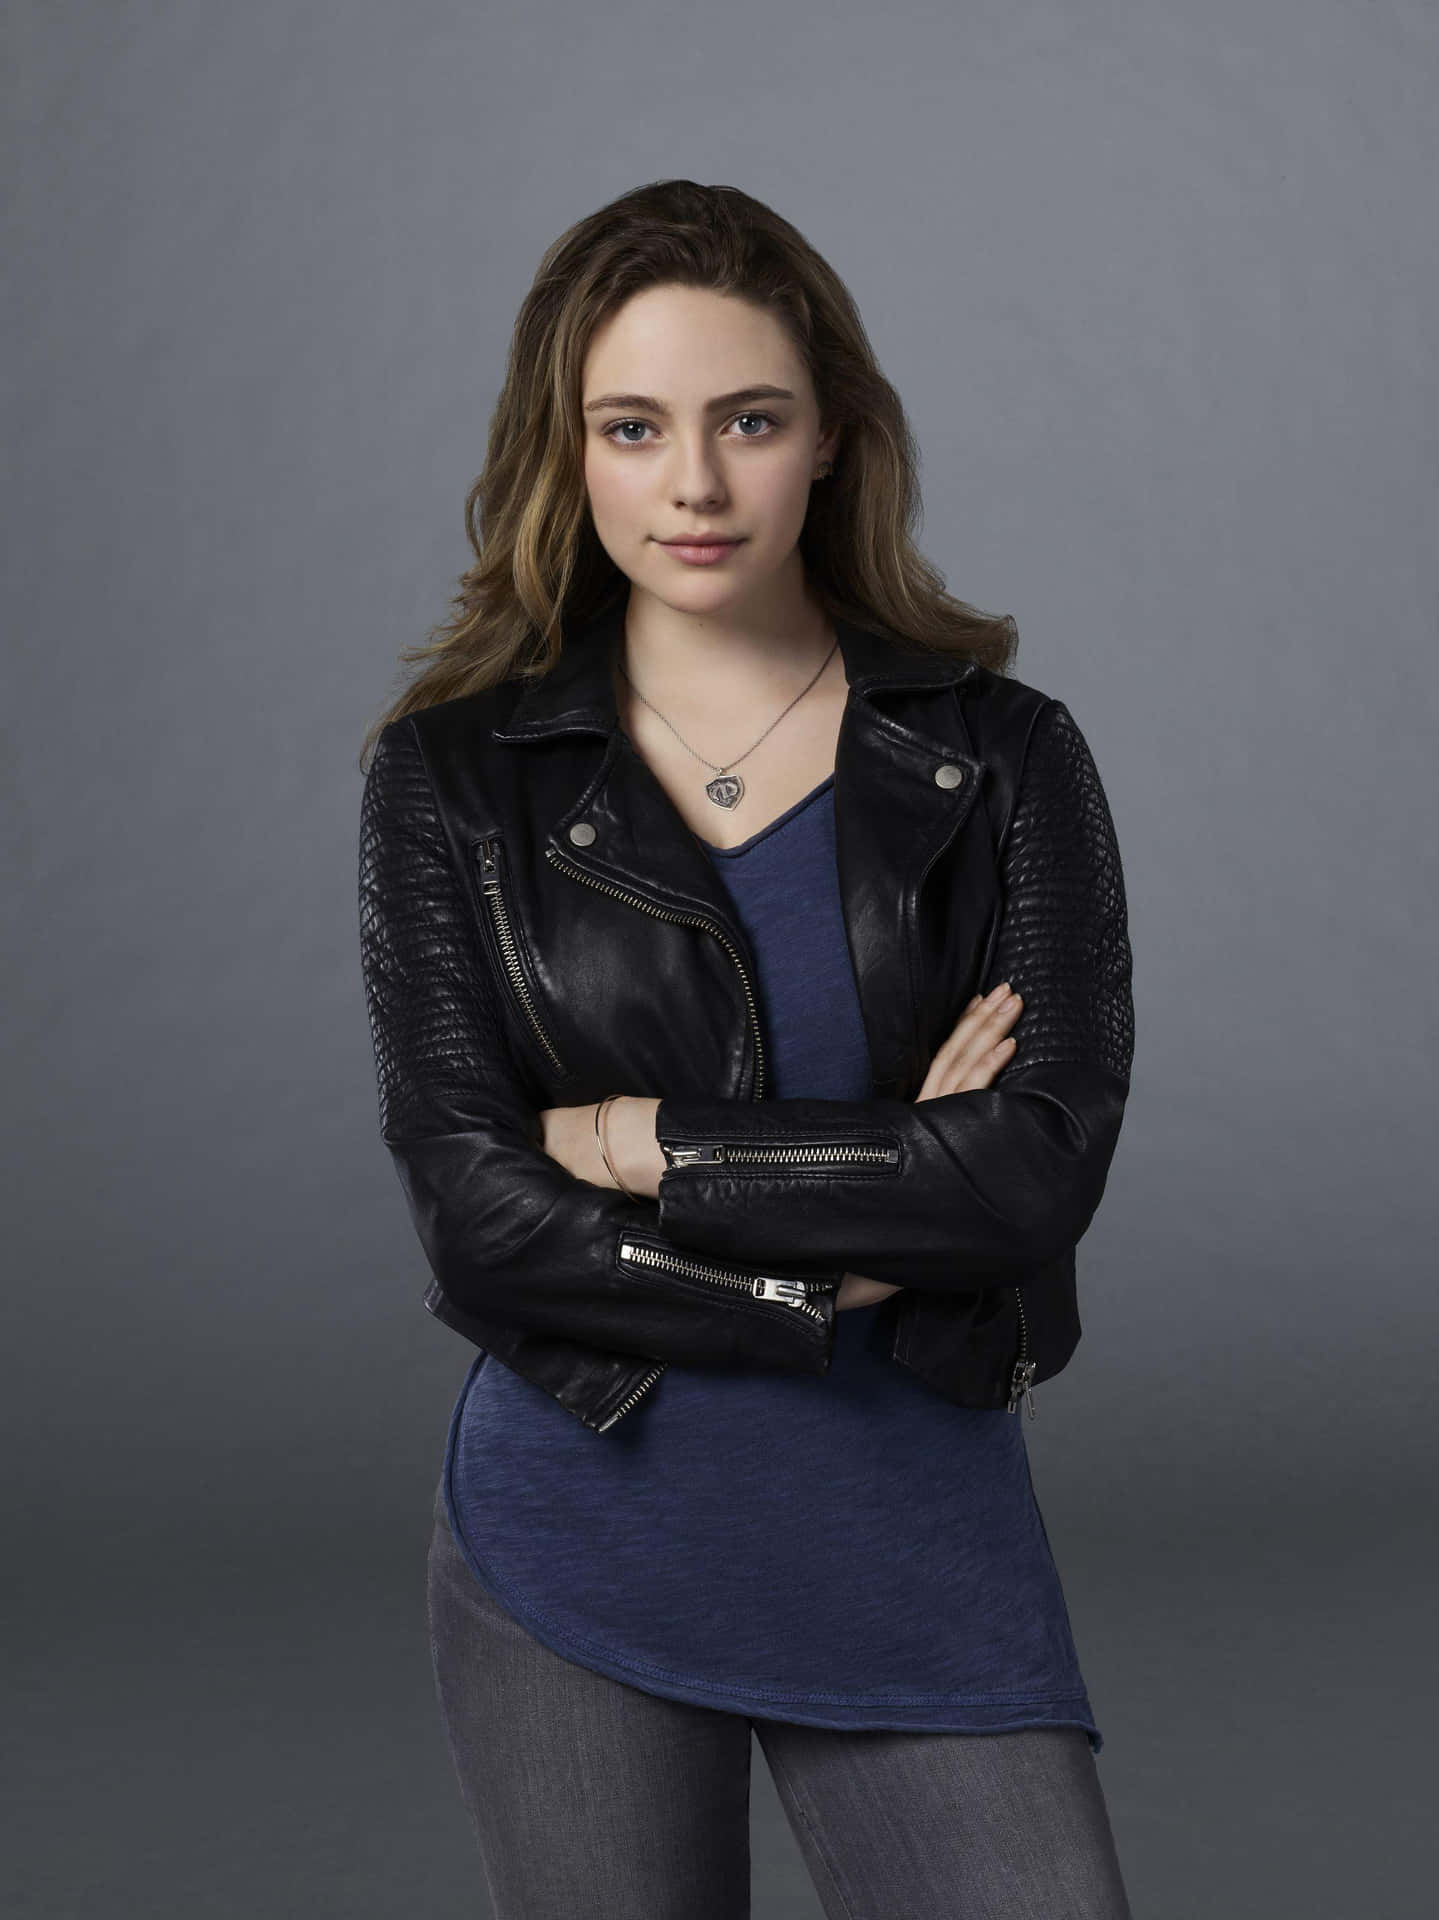 A Young Woman In A Black Leather Jacket Wallpaper